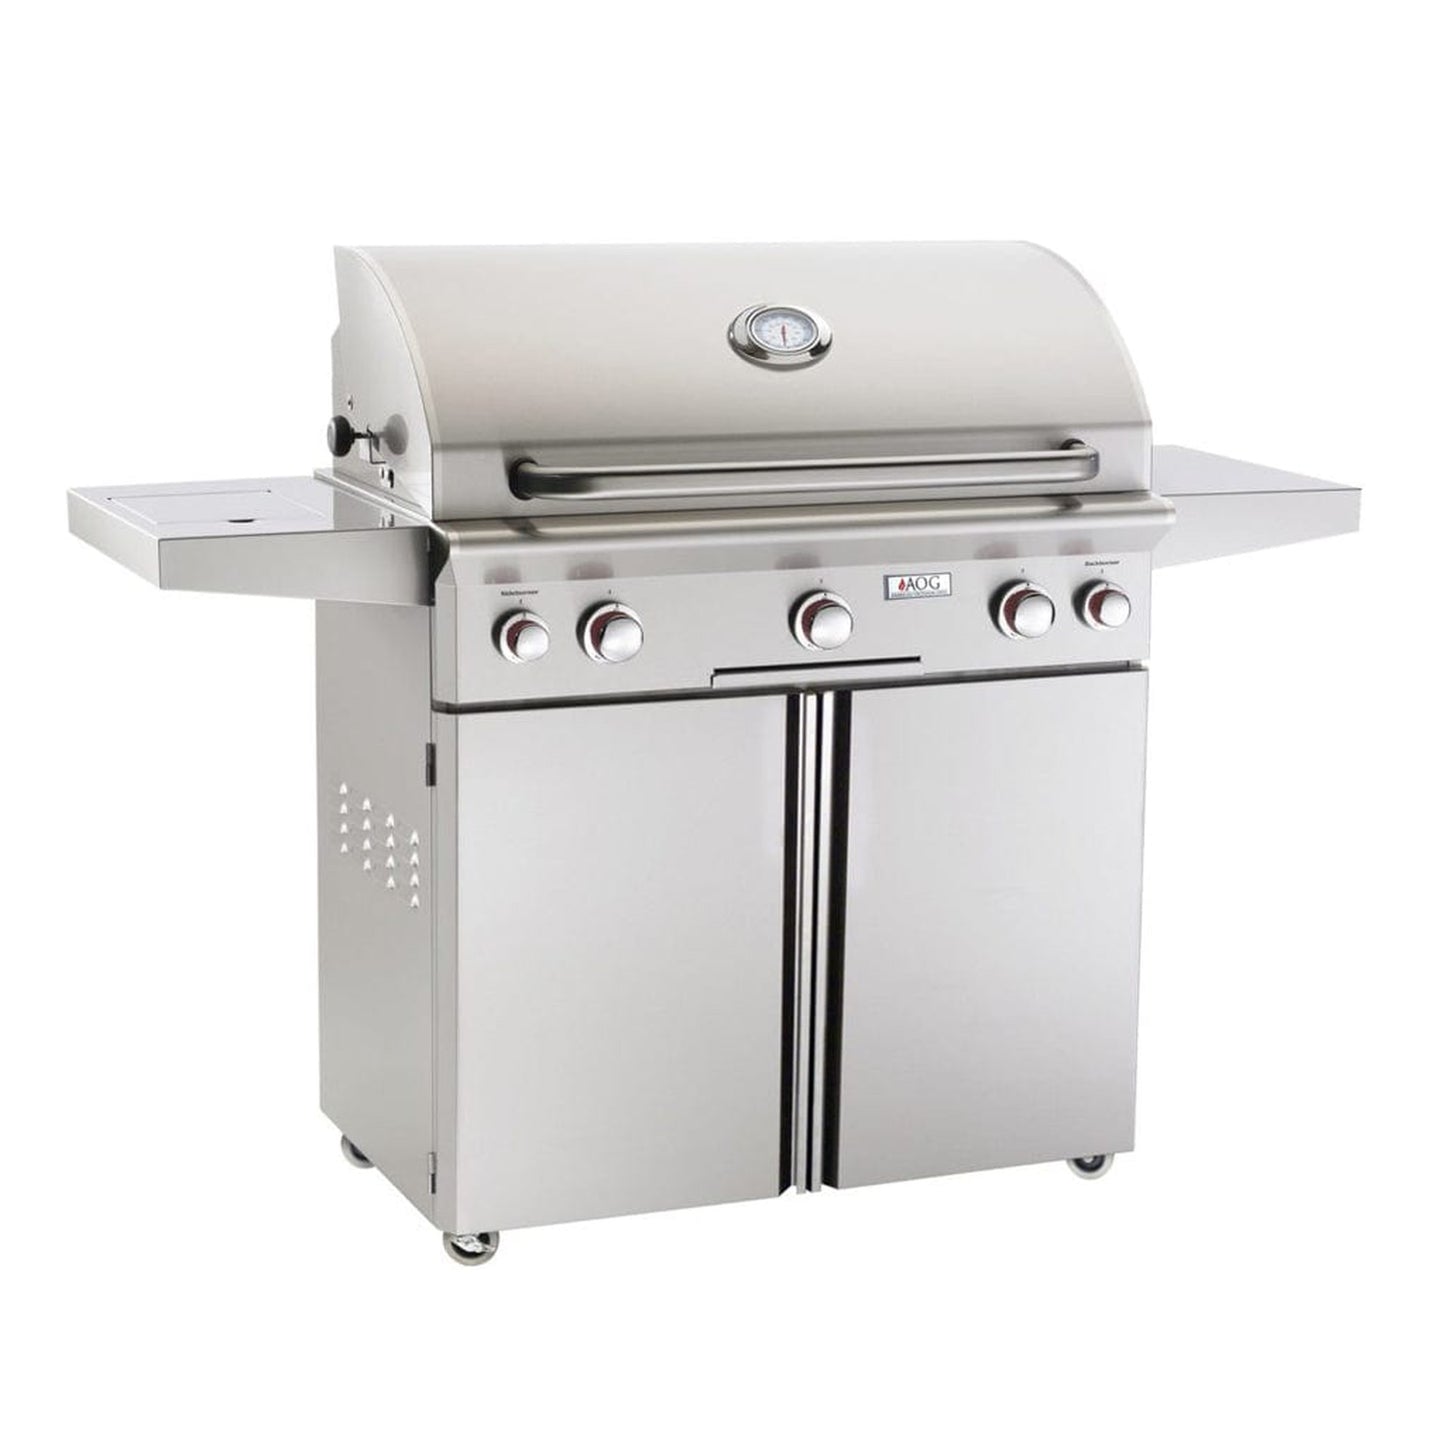 American Outdoor Grill 36" T-Series Portable 3-Burner Gas Grill